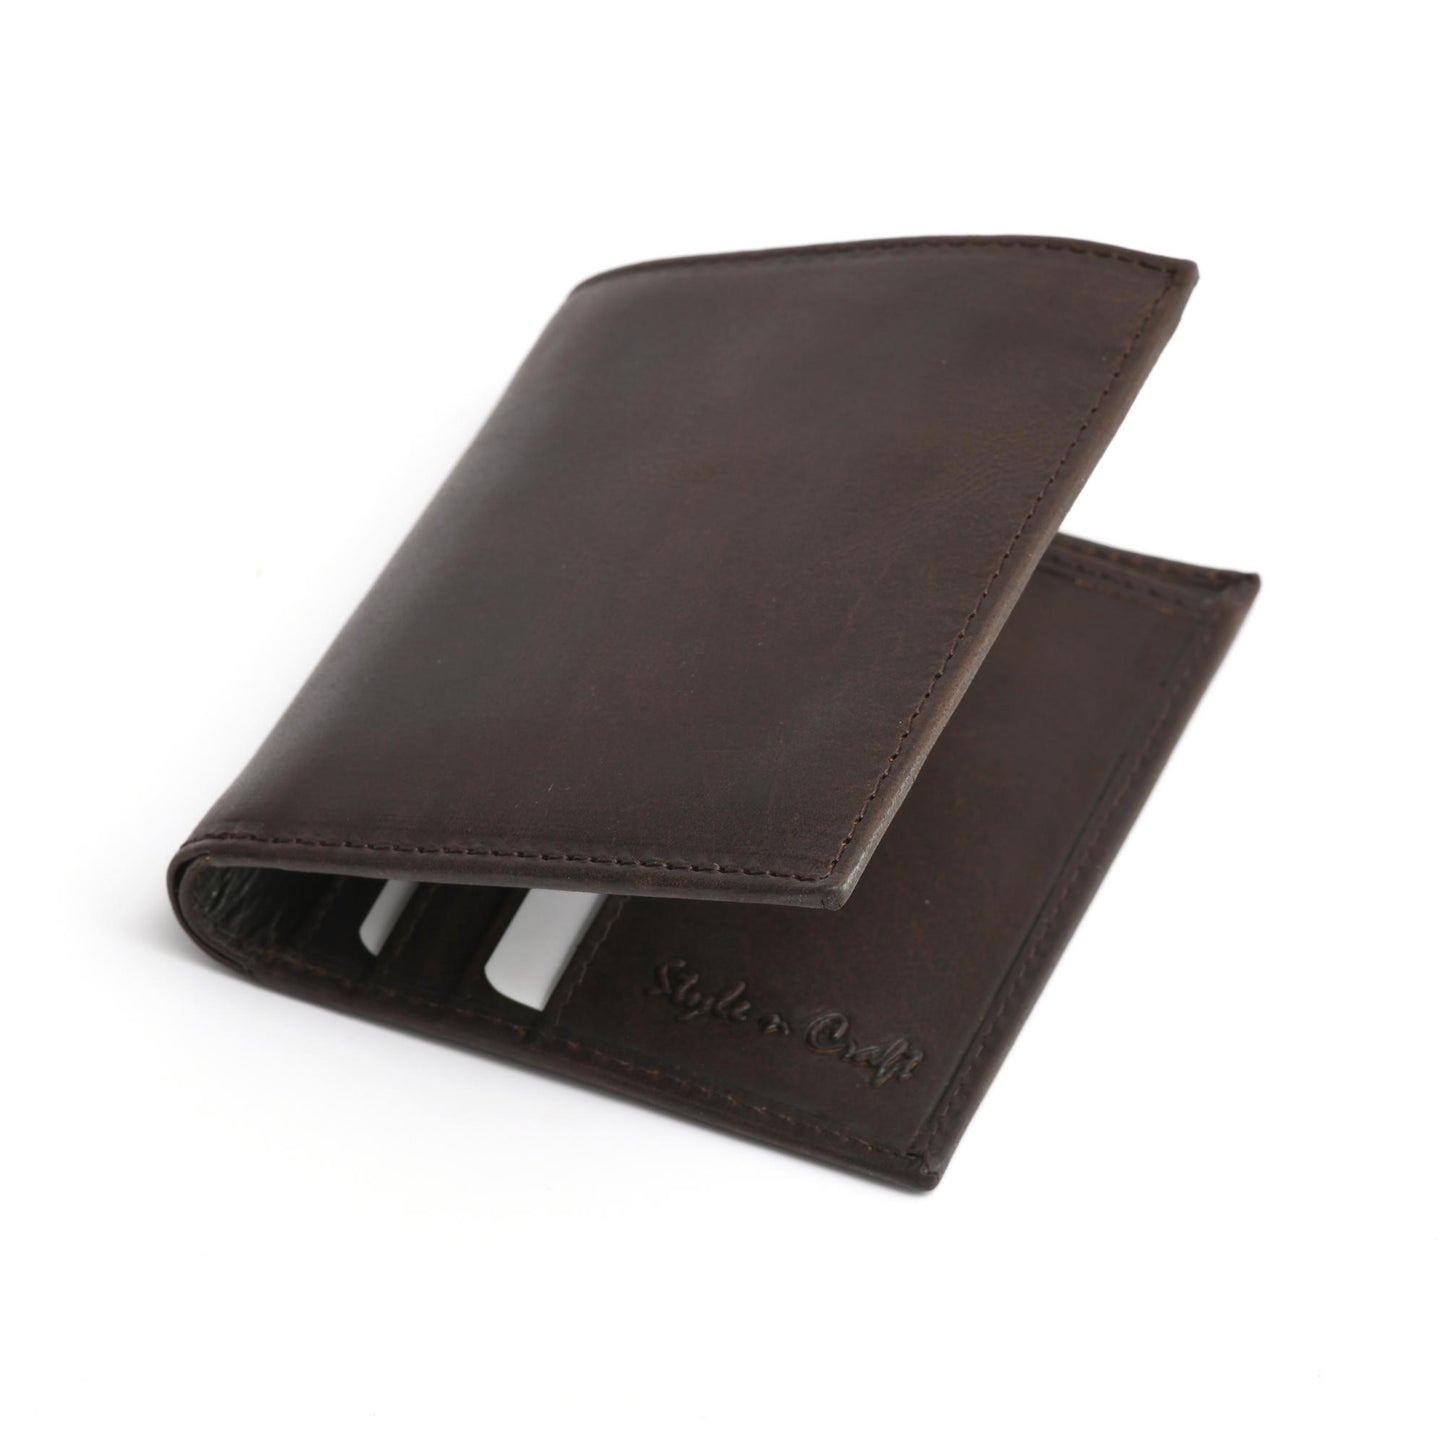 Style n Craft 391002 Slim Bifold Hipster Leather Wallet in Dark Brown Color - Closed Angled View Front